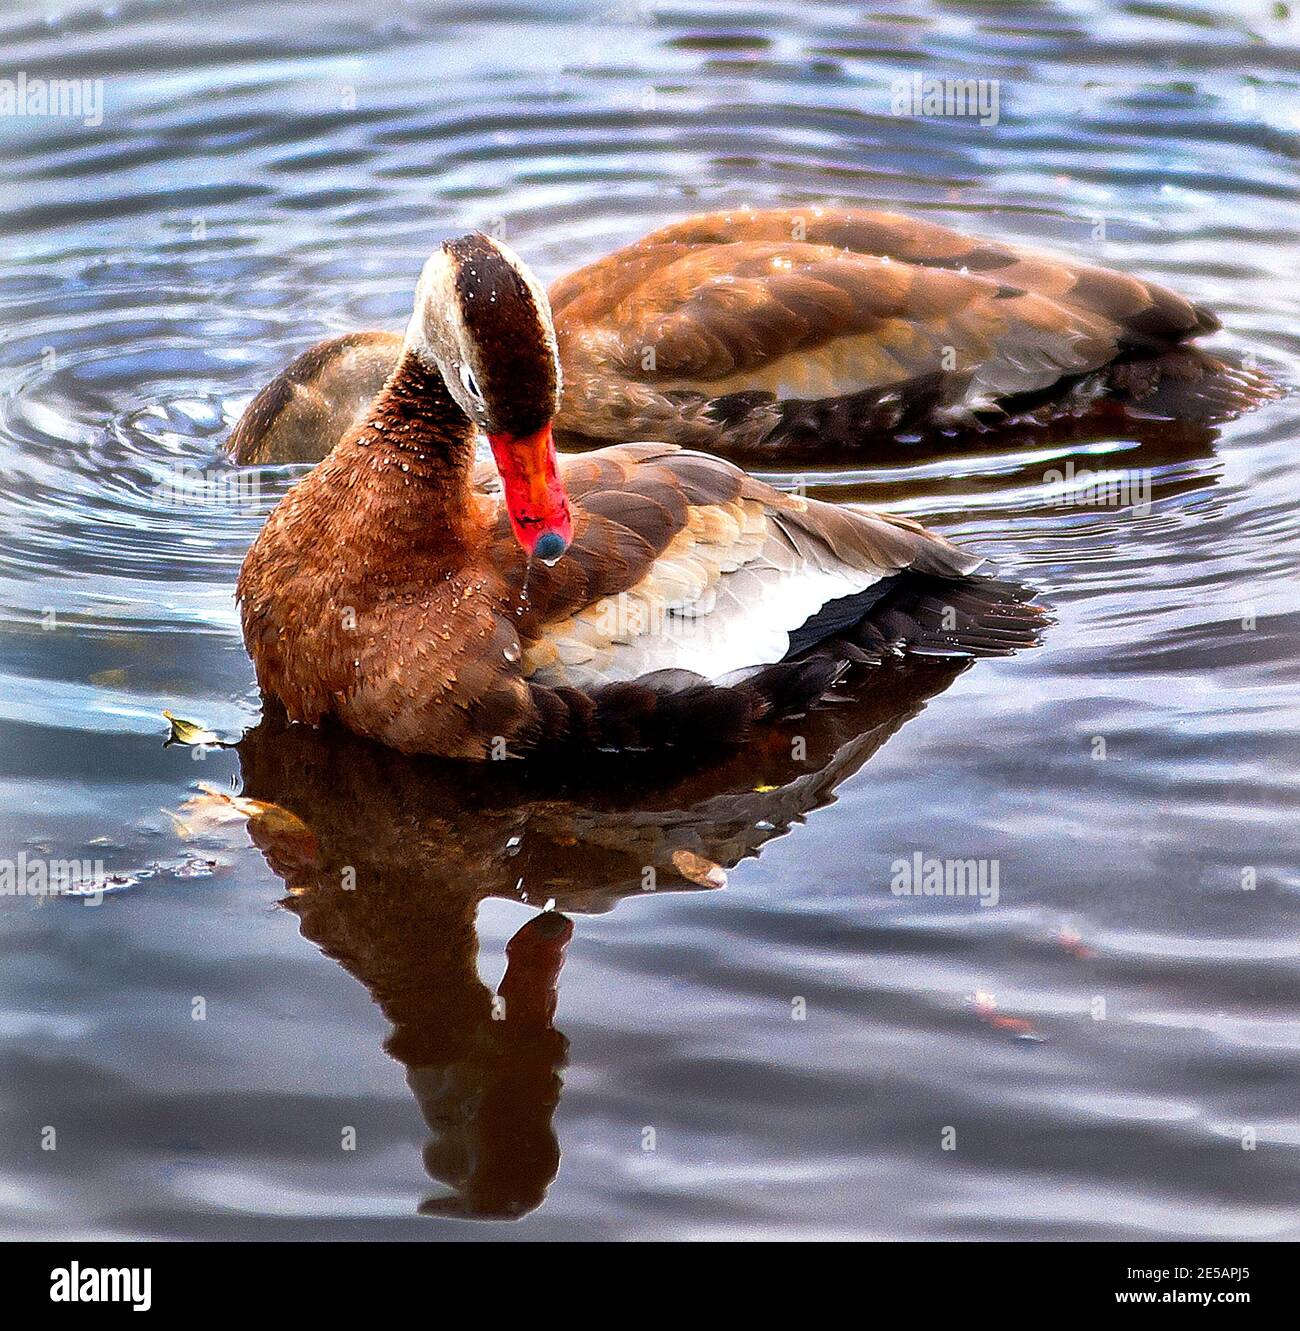 whistling duck in pond Stock Photo